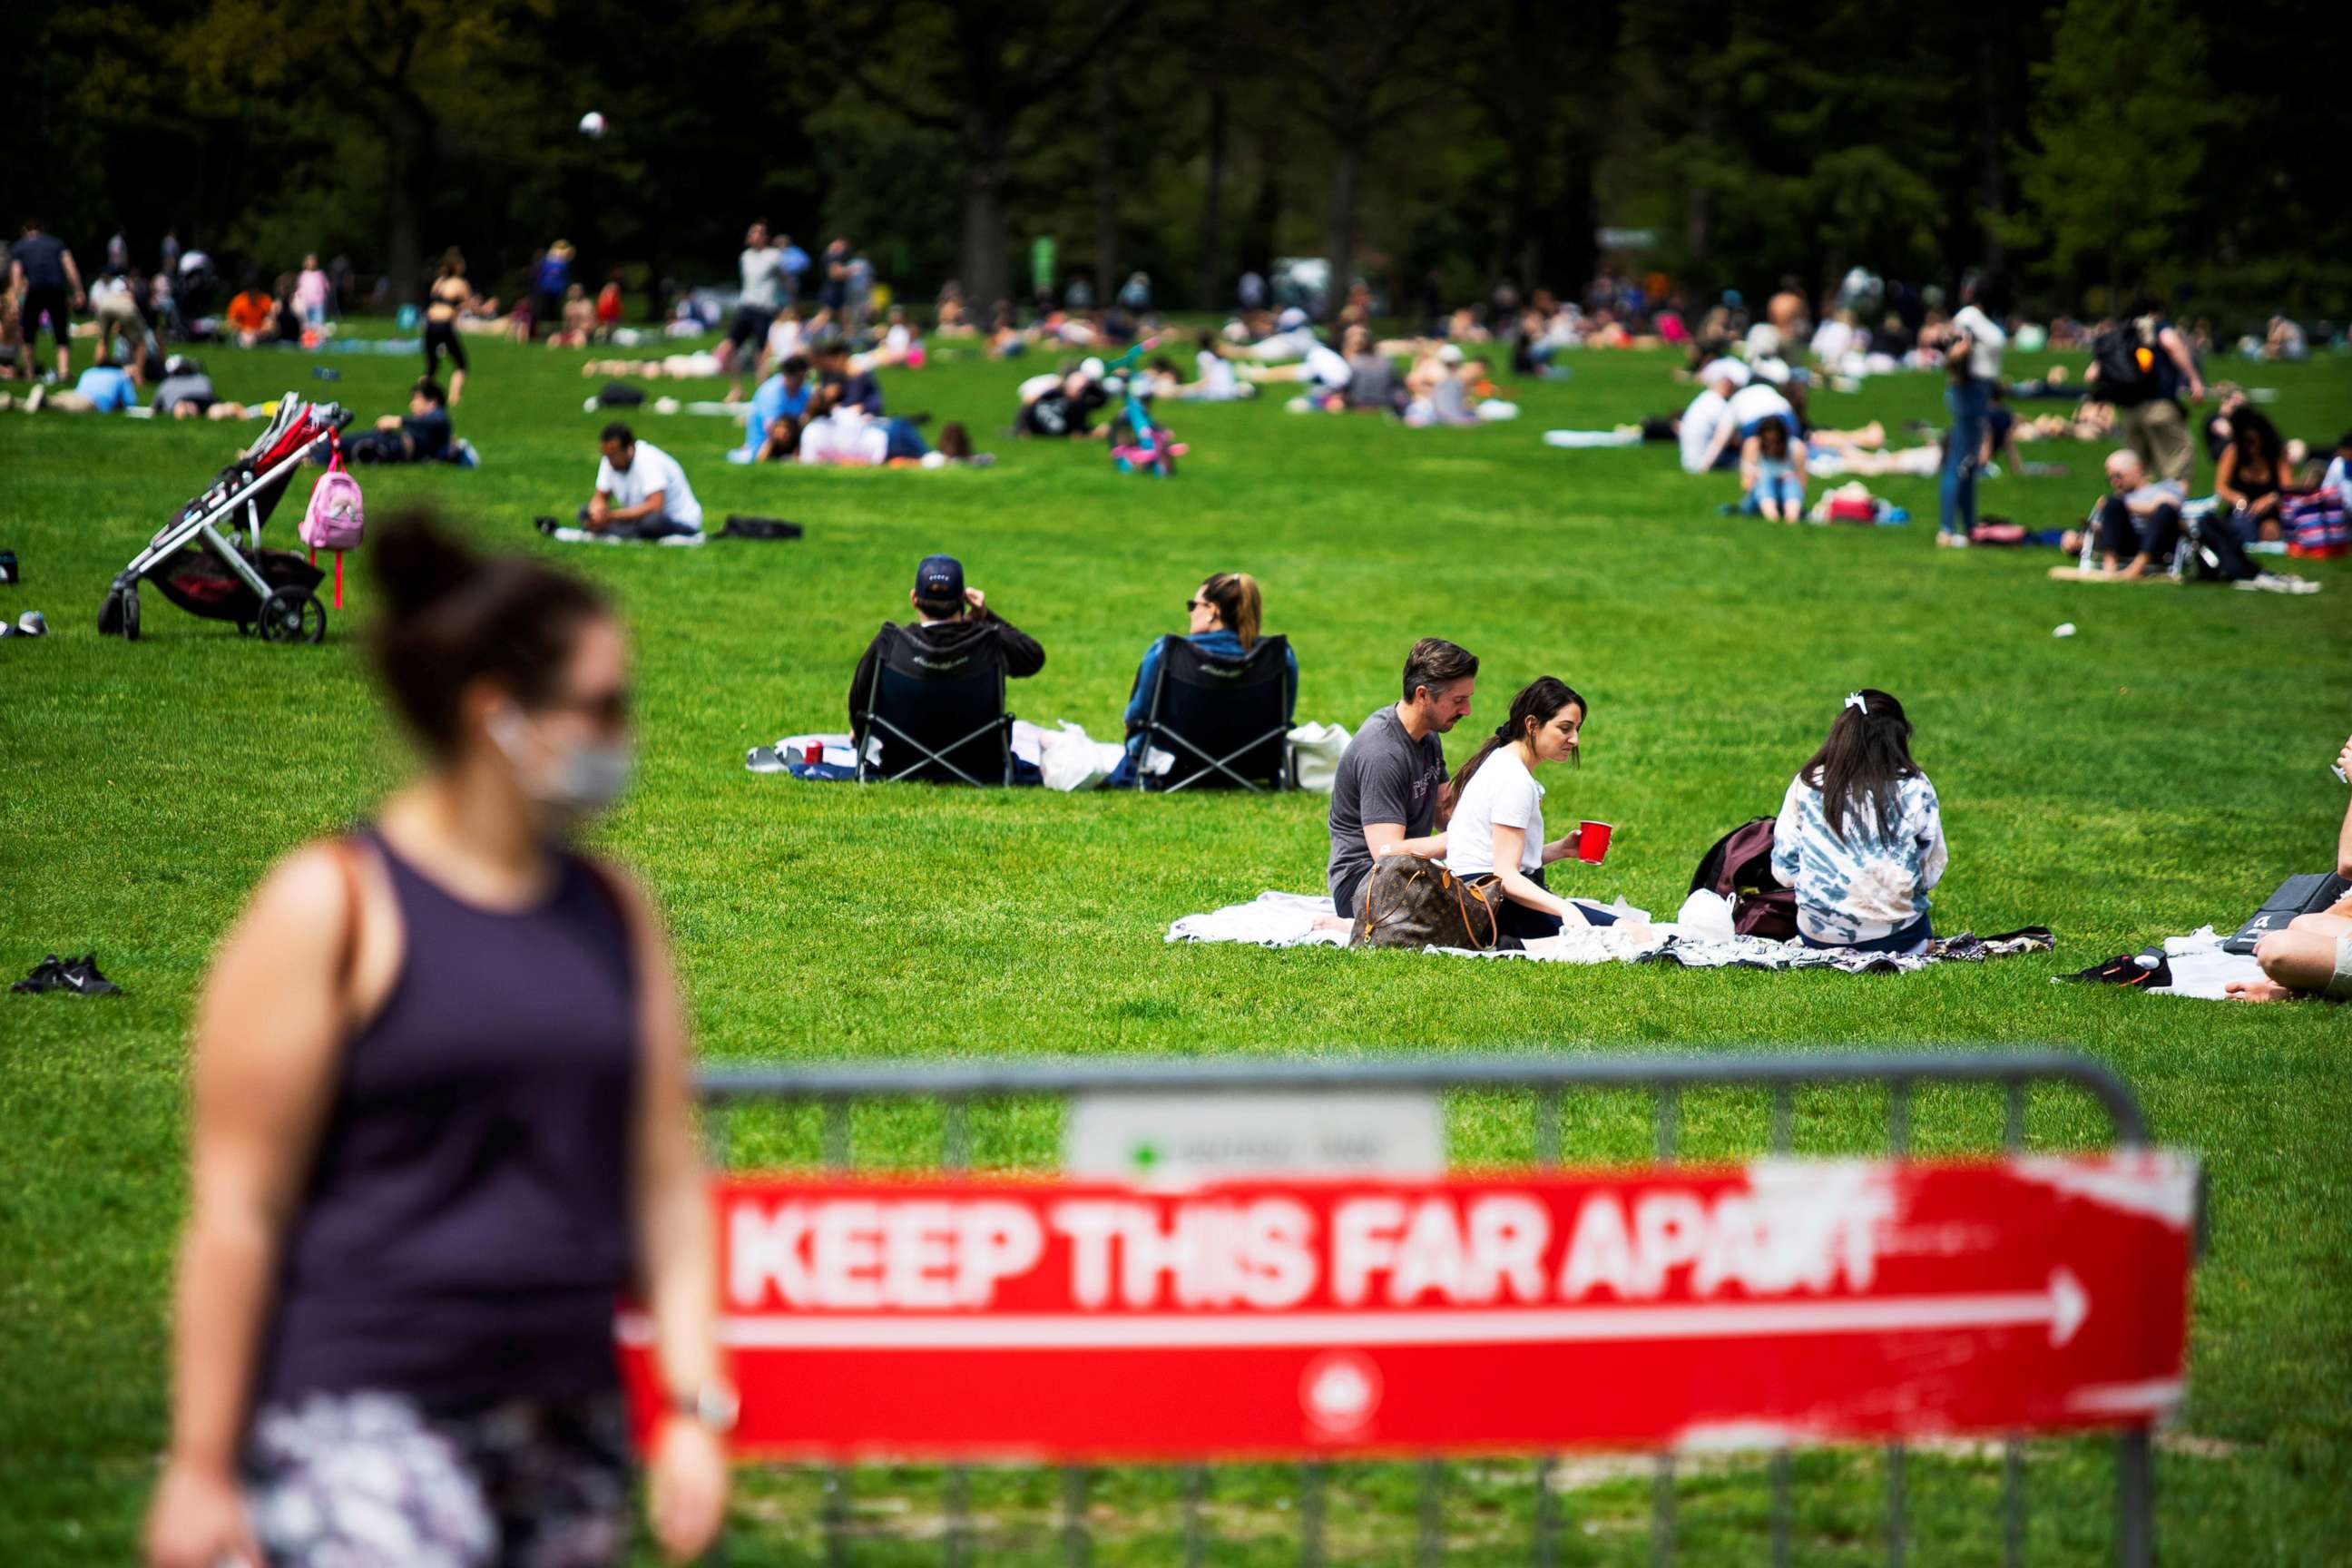 PHOTO: People enjoy Central Park while maintaining social distancing norms, during the coronavirus pandemic, in the Manhattan borough of New York City, May 2, 2020.